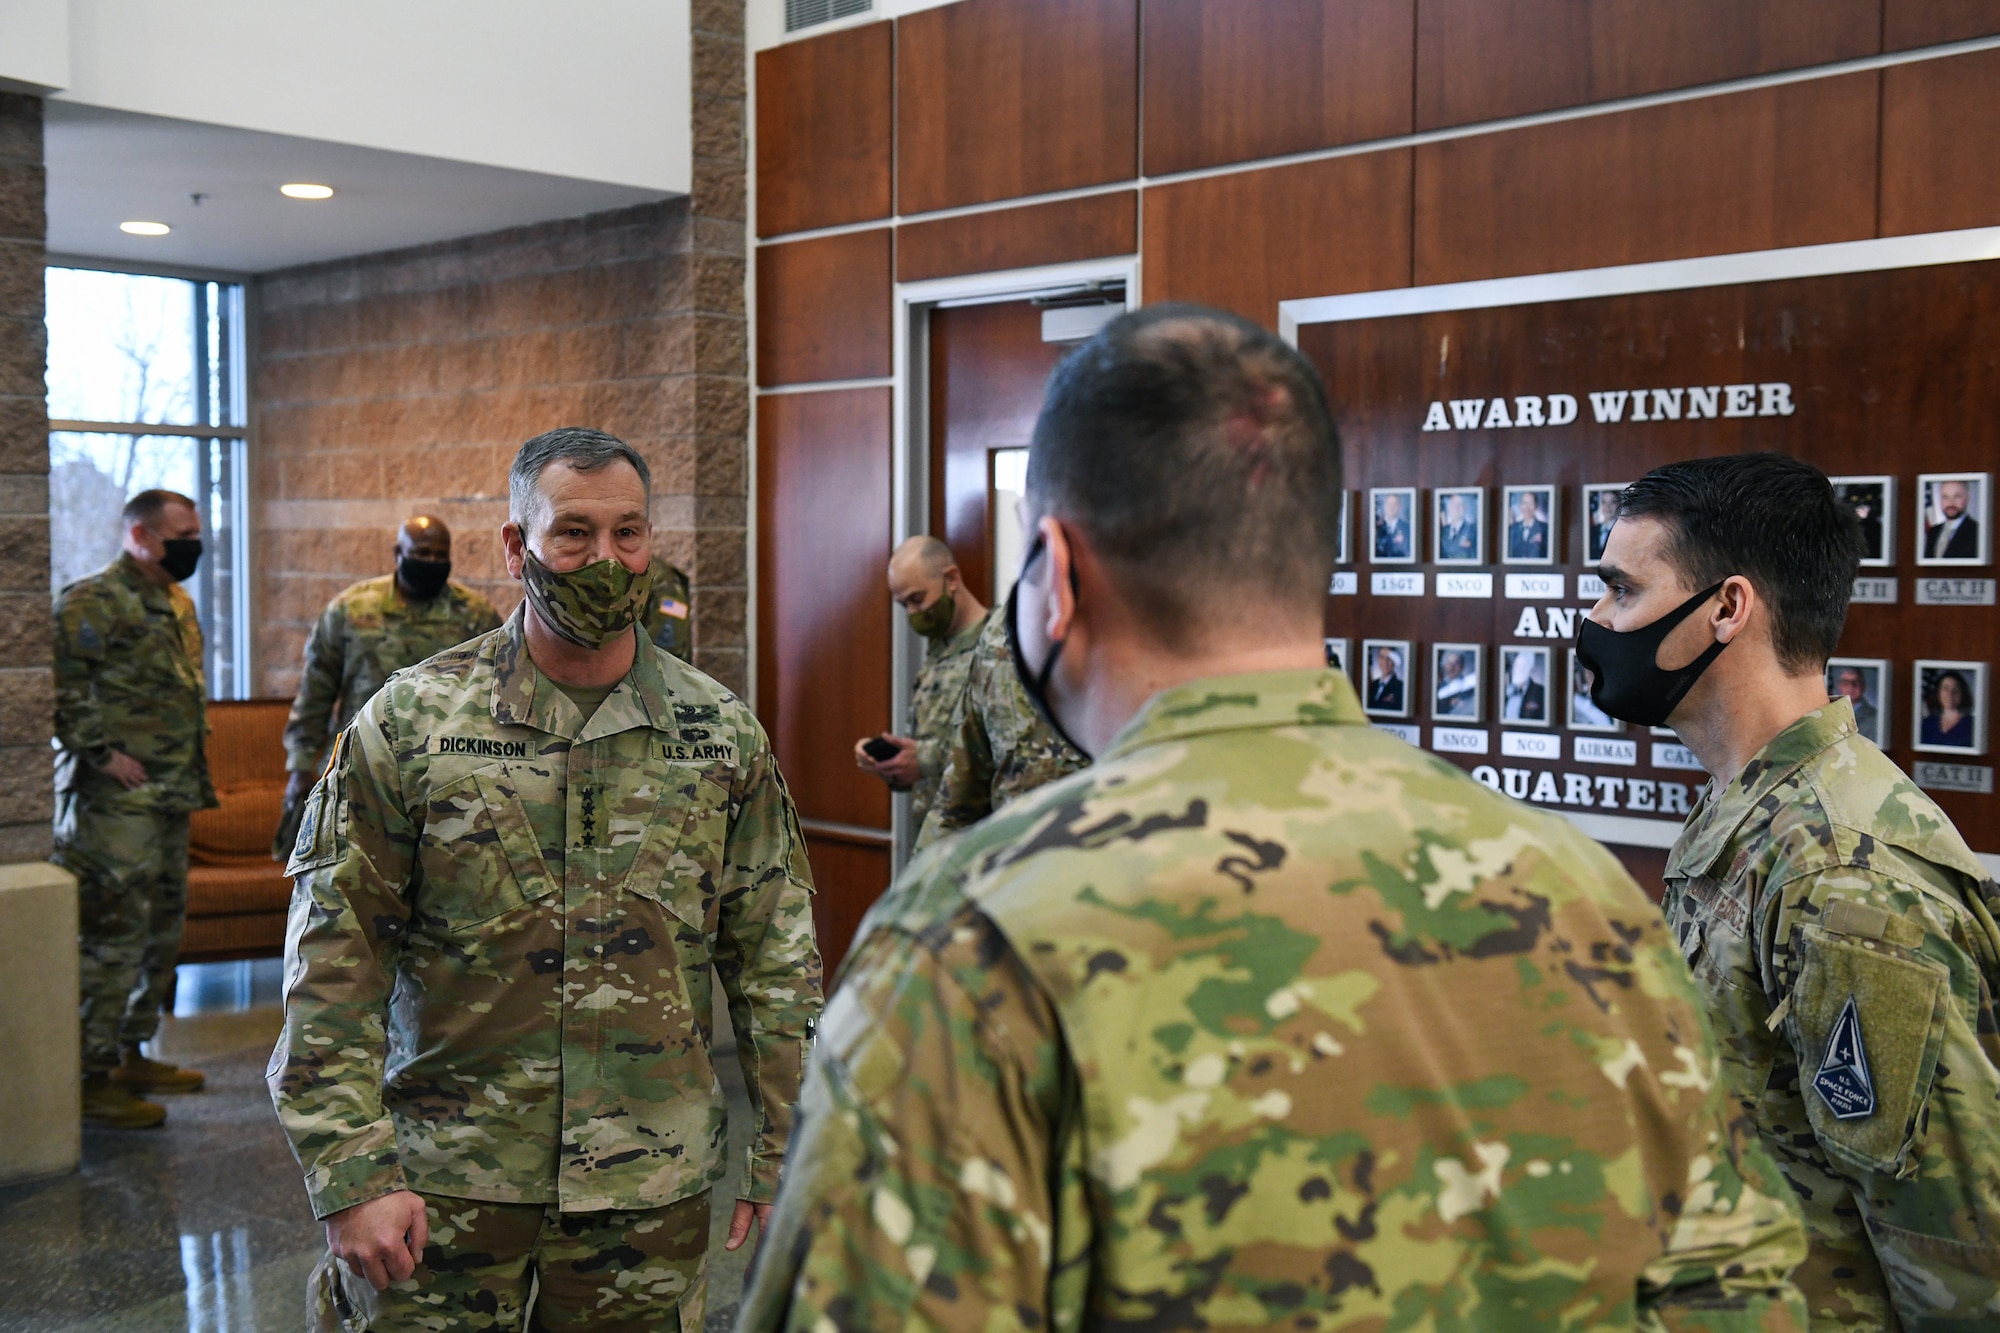 Chaplain (Maj.) Justin Combs, right, introduces Tech. Sgt. Matthew Brandt, center, Buckley Garrison Staff Agencies NCO in charge of training and readiness, prior to U.S. Army Gen. James Dickinson, left, U.S. Space Command commander, coining Brandt for exceptional performance in the Headquarters building on Buckley Air Force Base, Colo., Jan. 7, 2021.